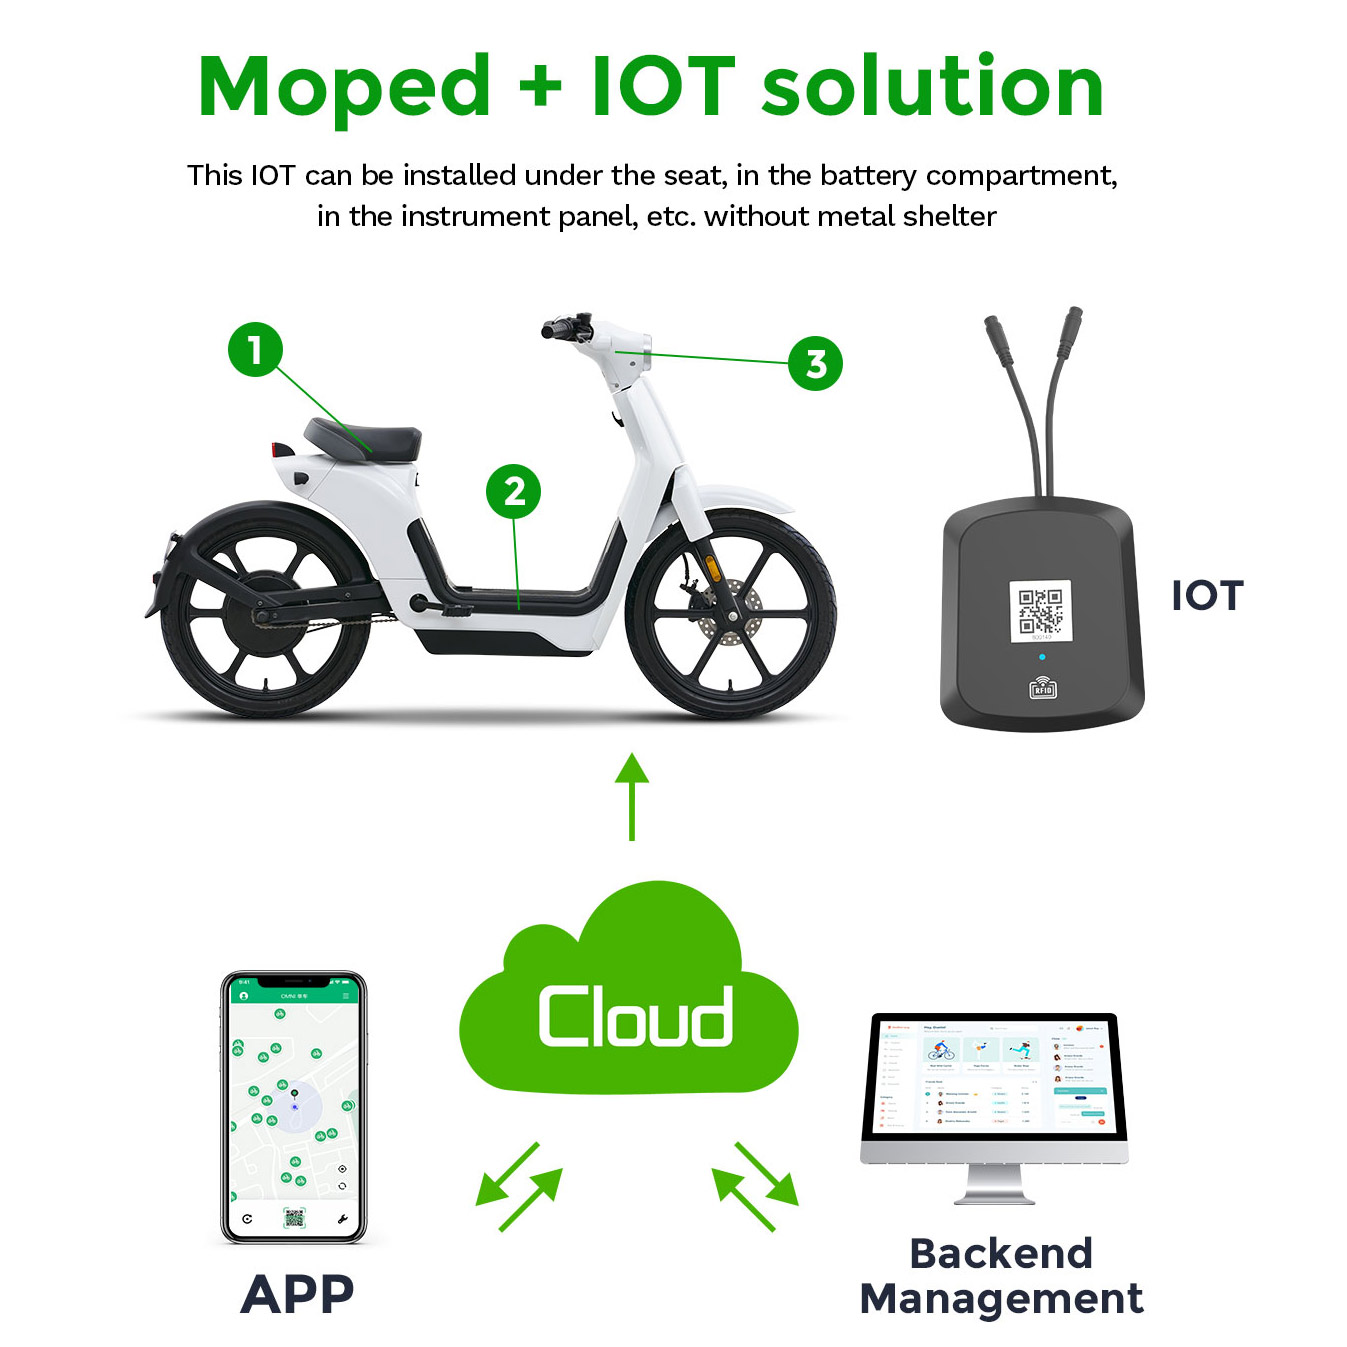 IoT Solutions for Mopeds with IoT Device APP and Backend